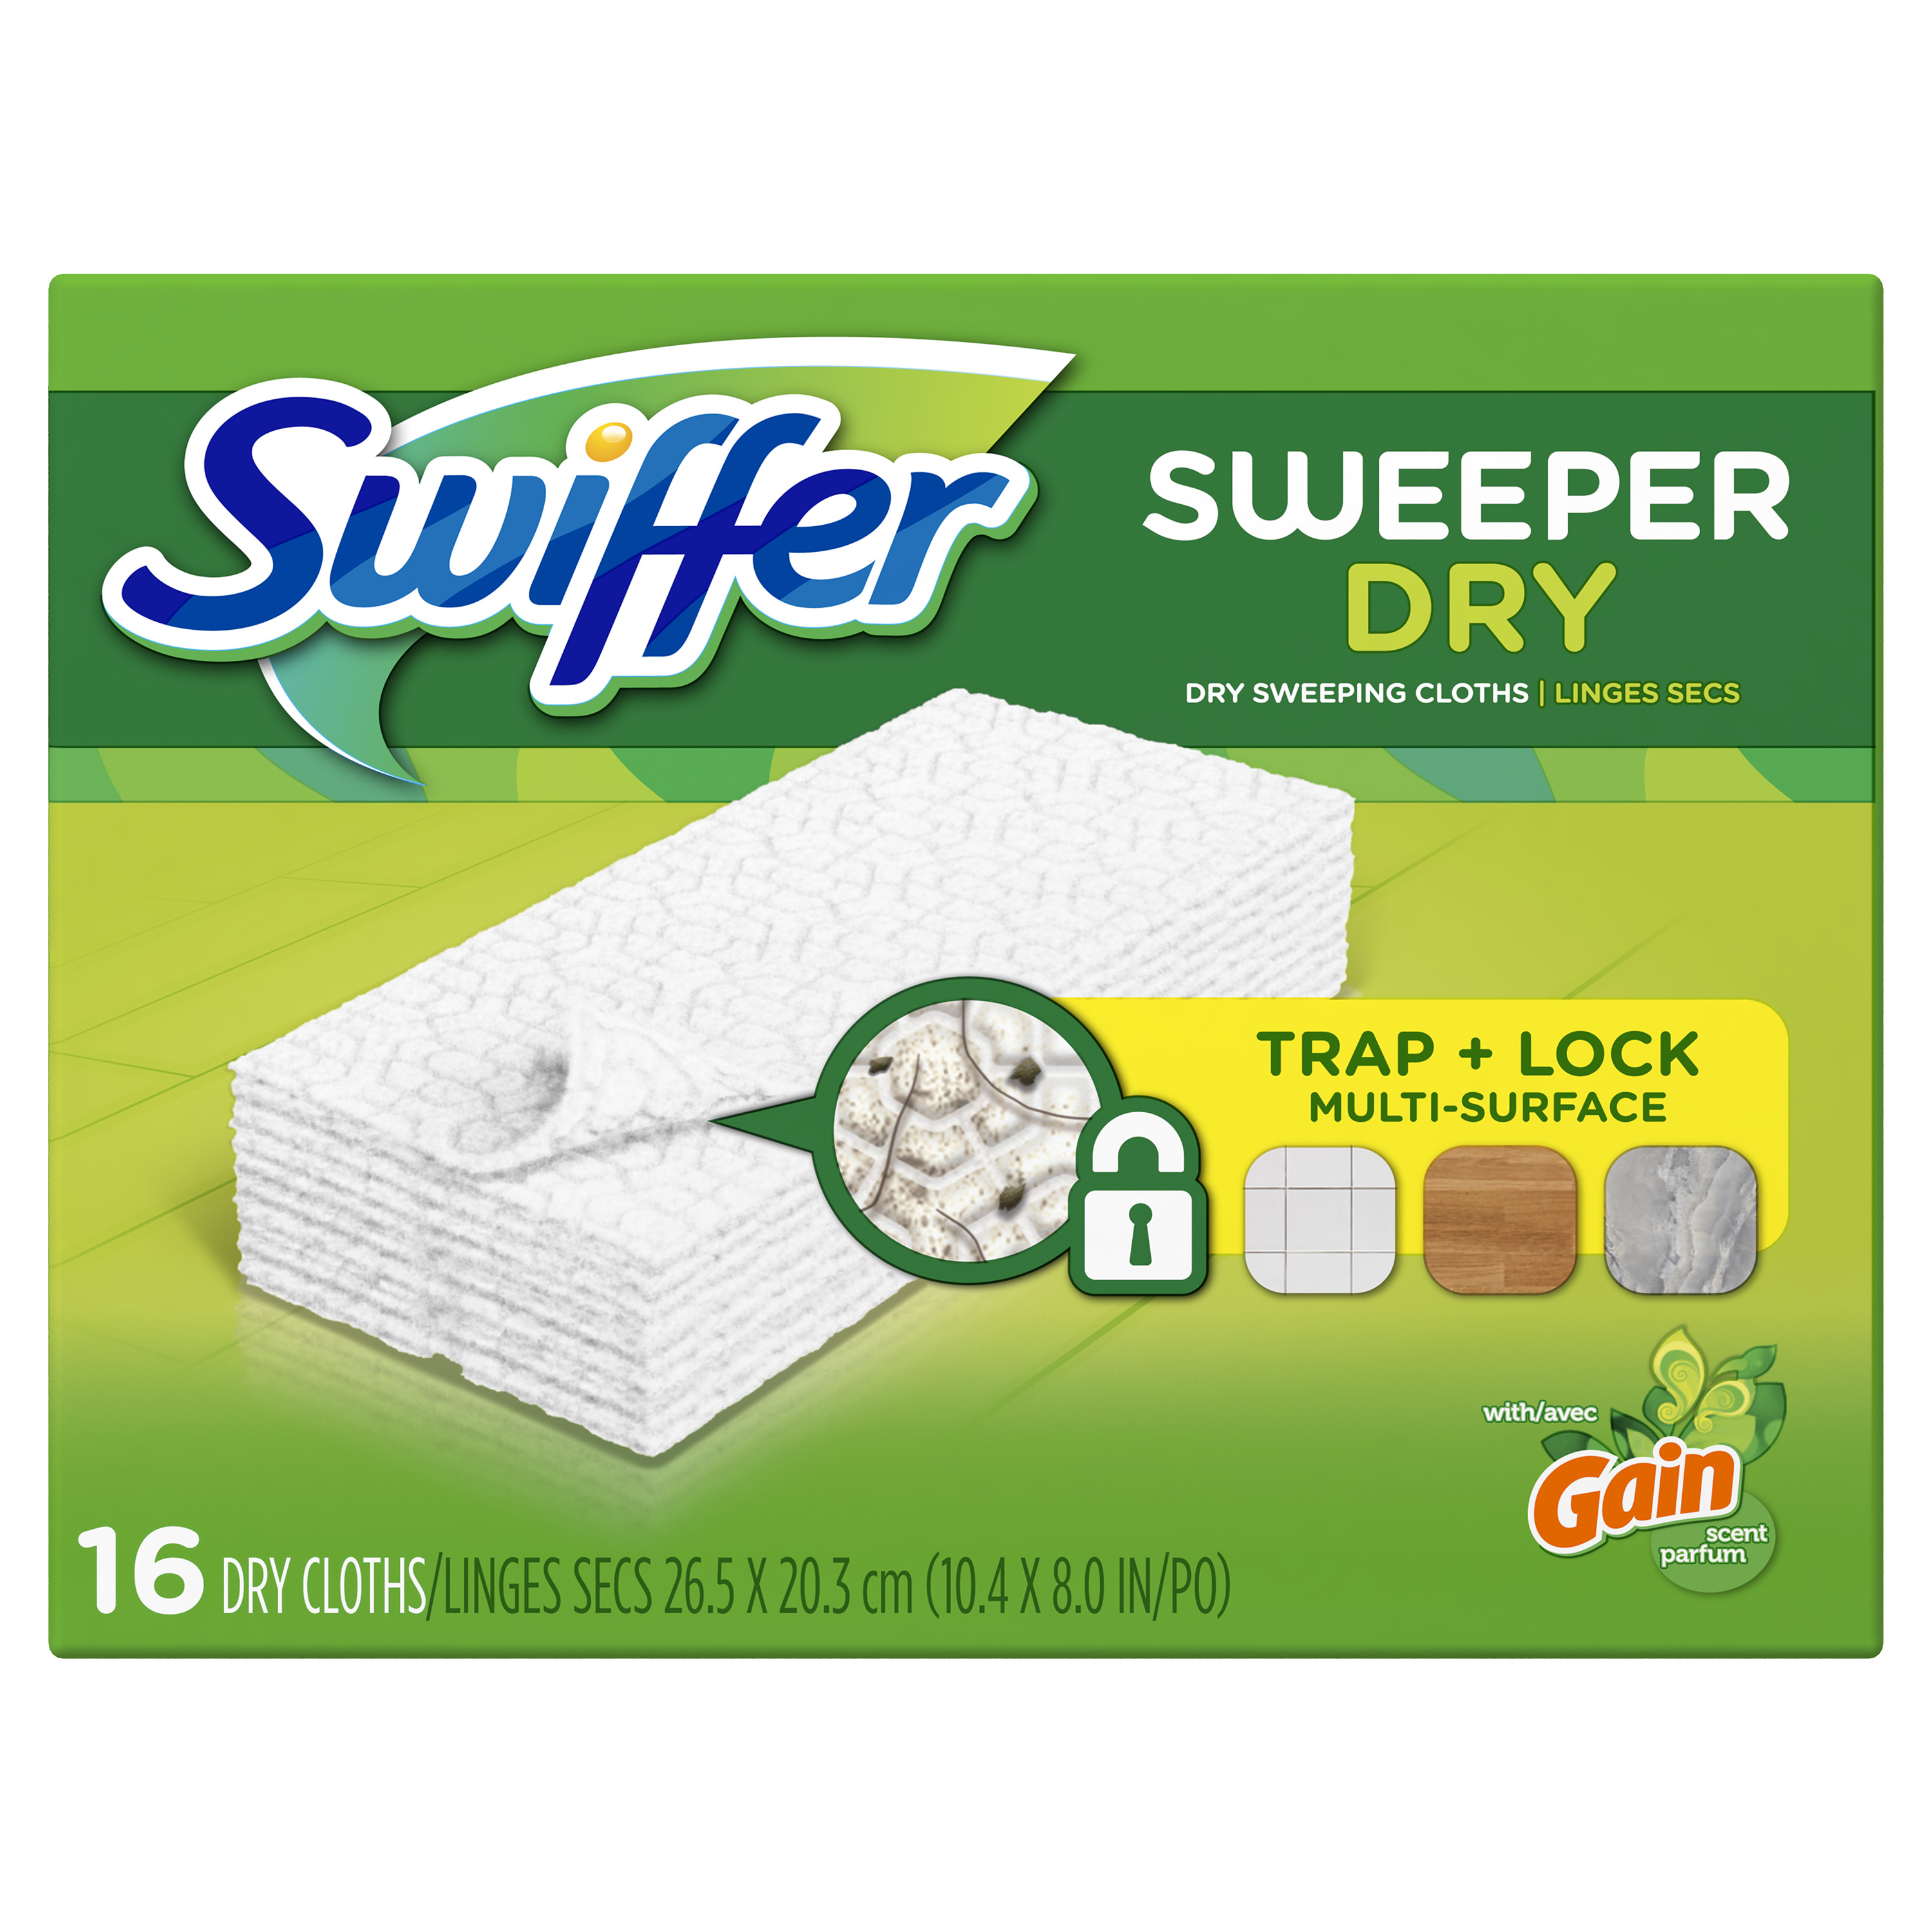 Swiffer Sweeper Dry Sweeping Pad Multi Surface Refills for Dusters Floor Mop, Gain Scent, 16 count - image 1 of 10